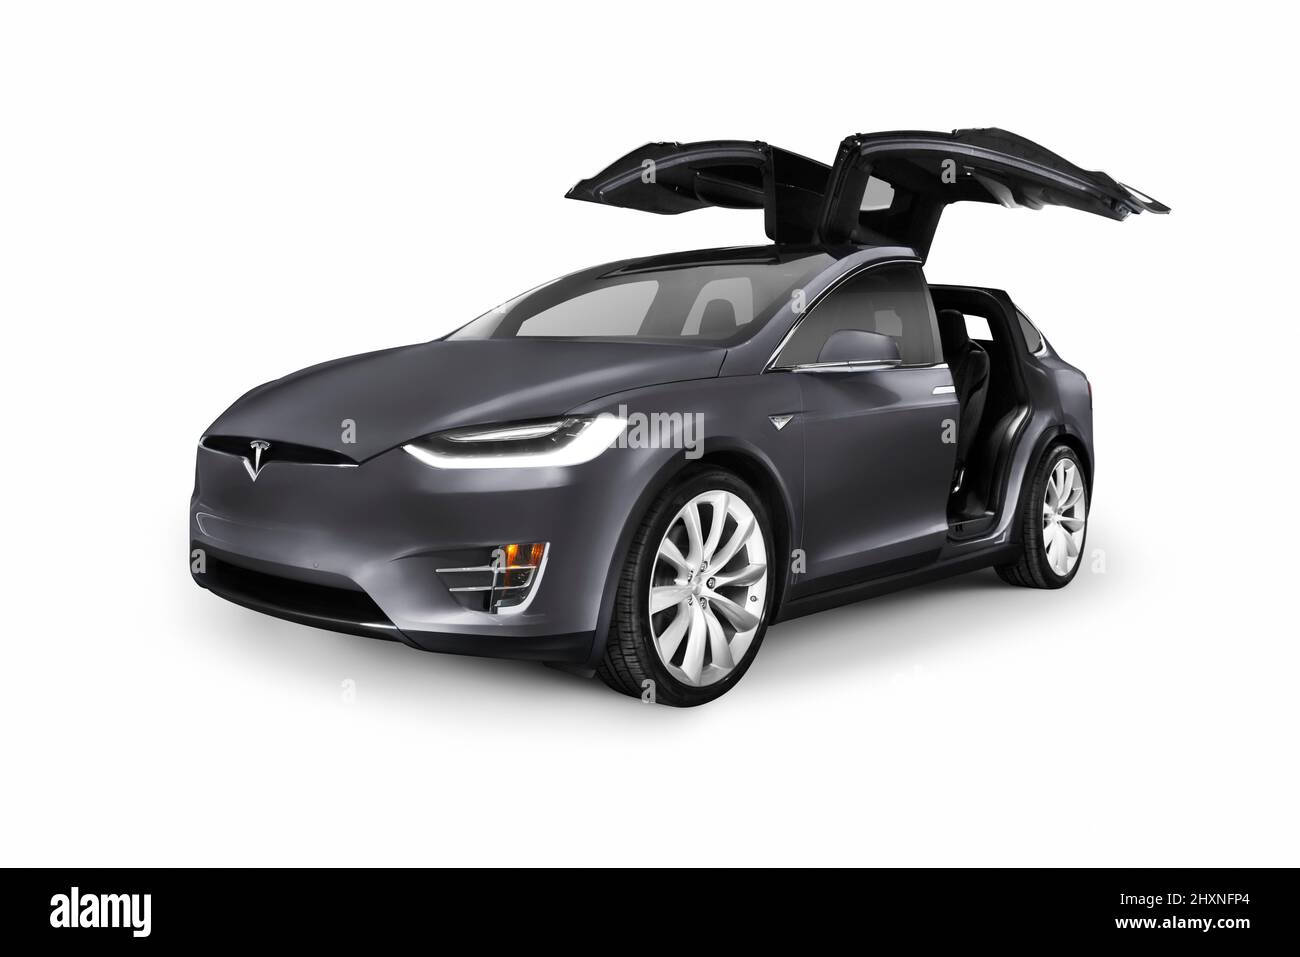 License and prints at MaximImages.com - Tesla luxury electric car, automotive stock photo. Stock Photo